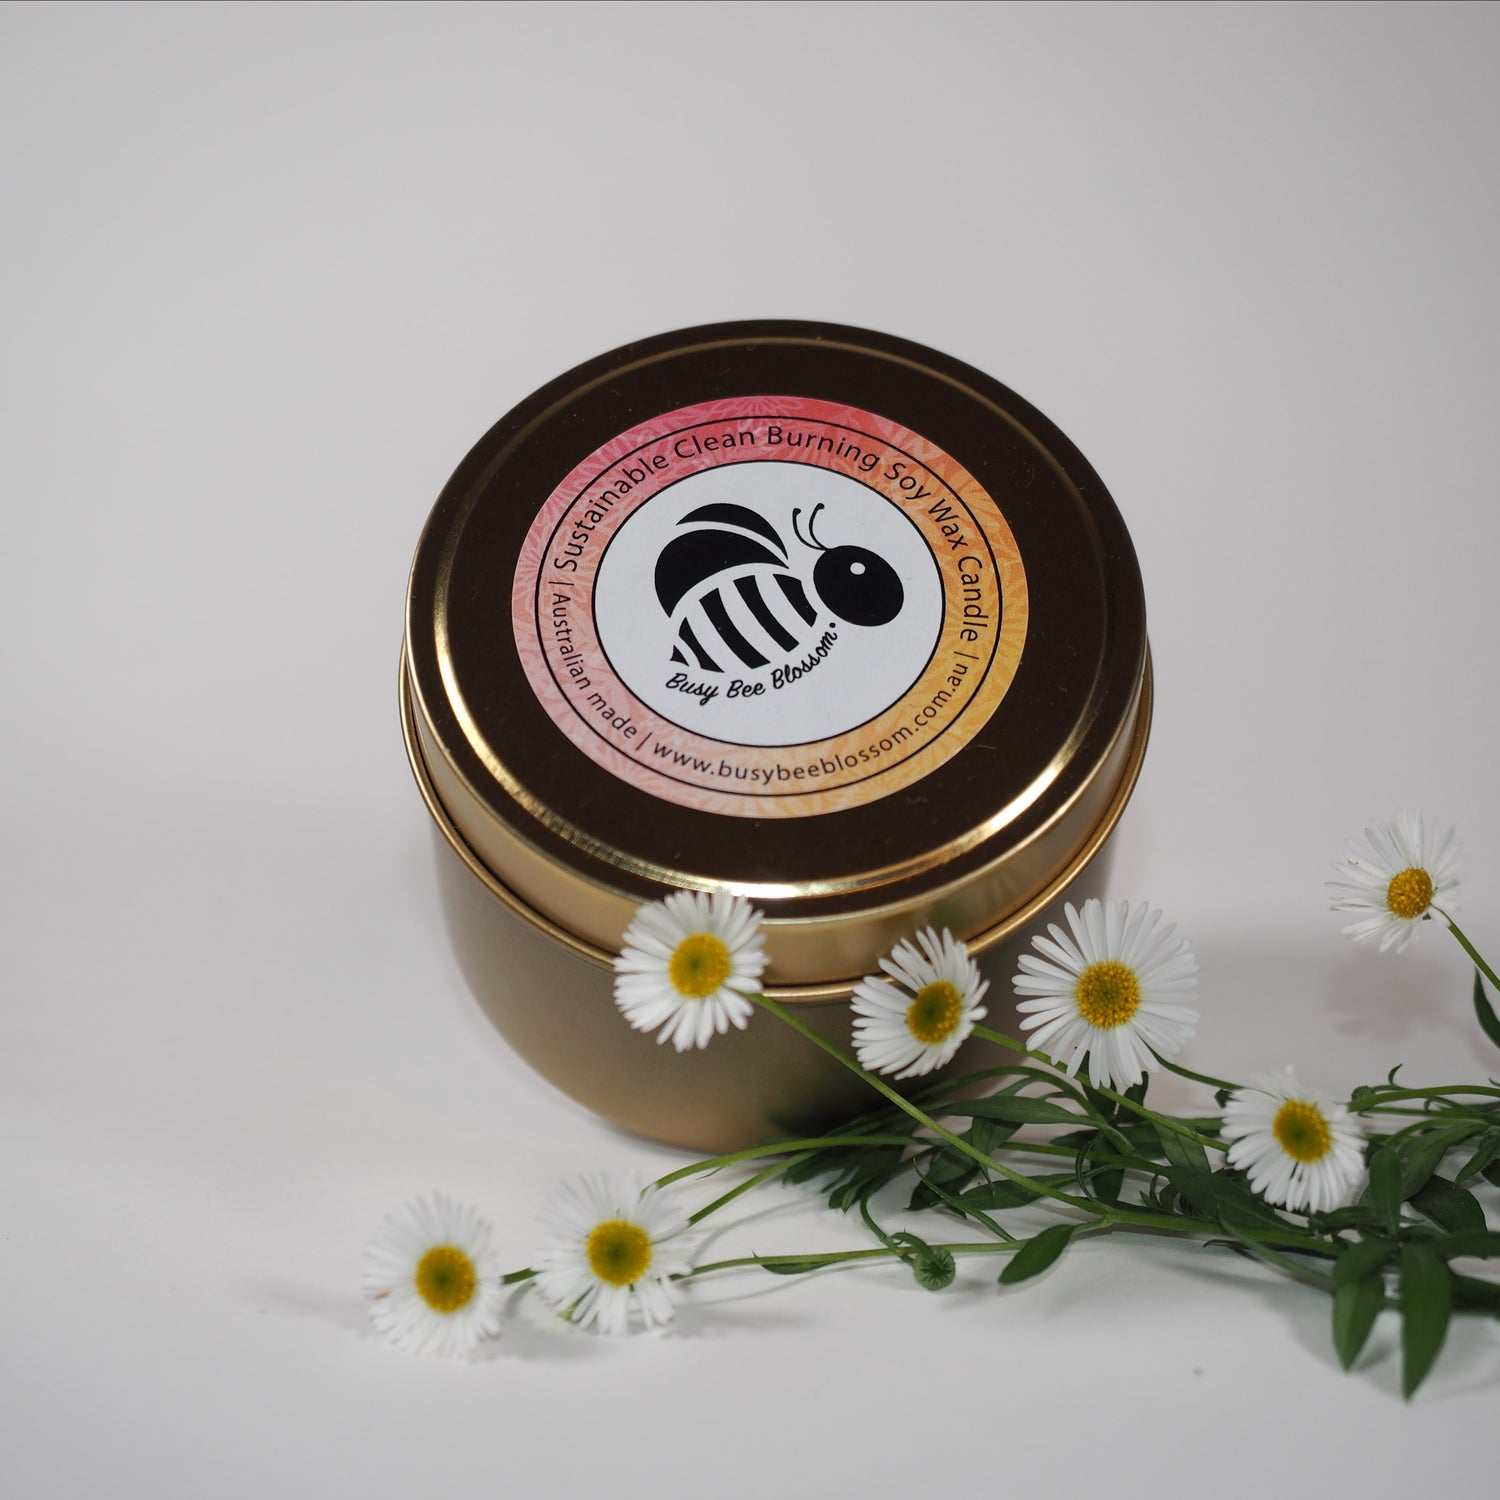 Gold travel tin with eco-friendly coconut and soy wax scented in Australian Sandalwood